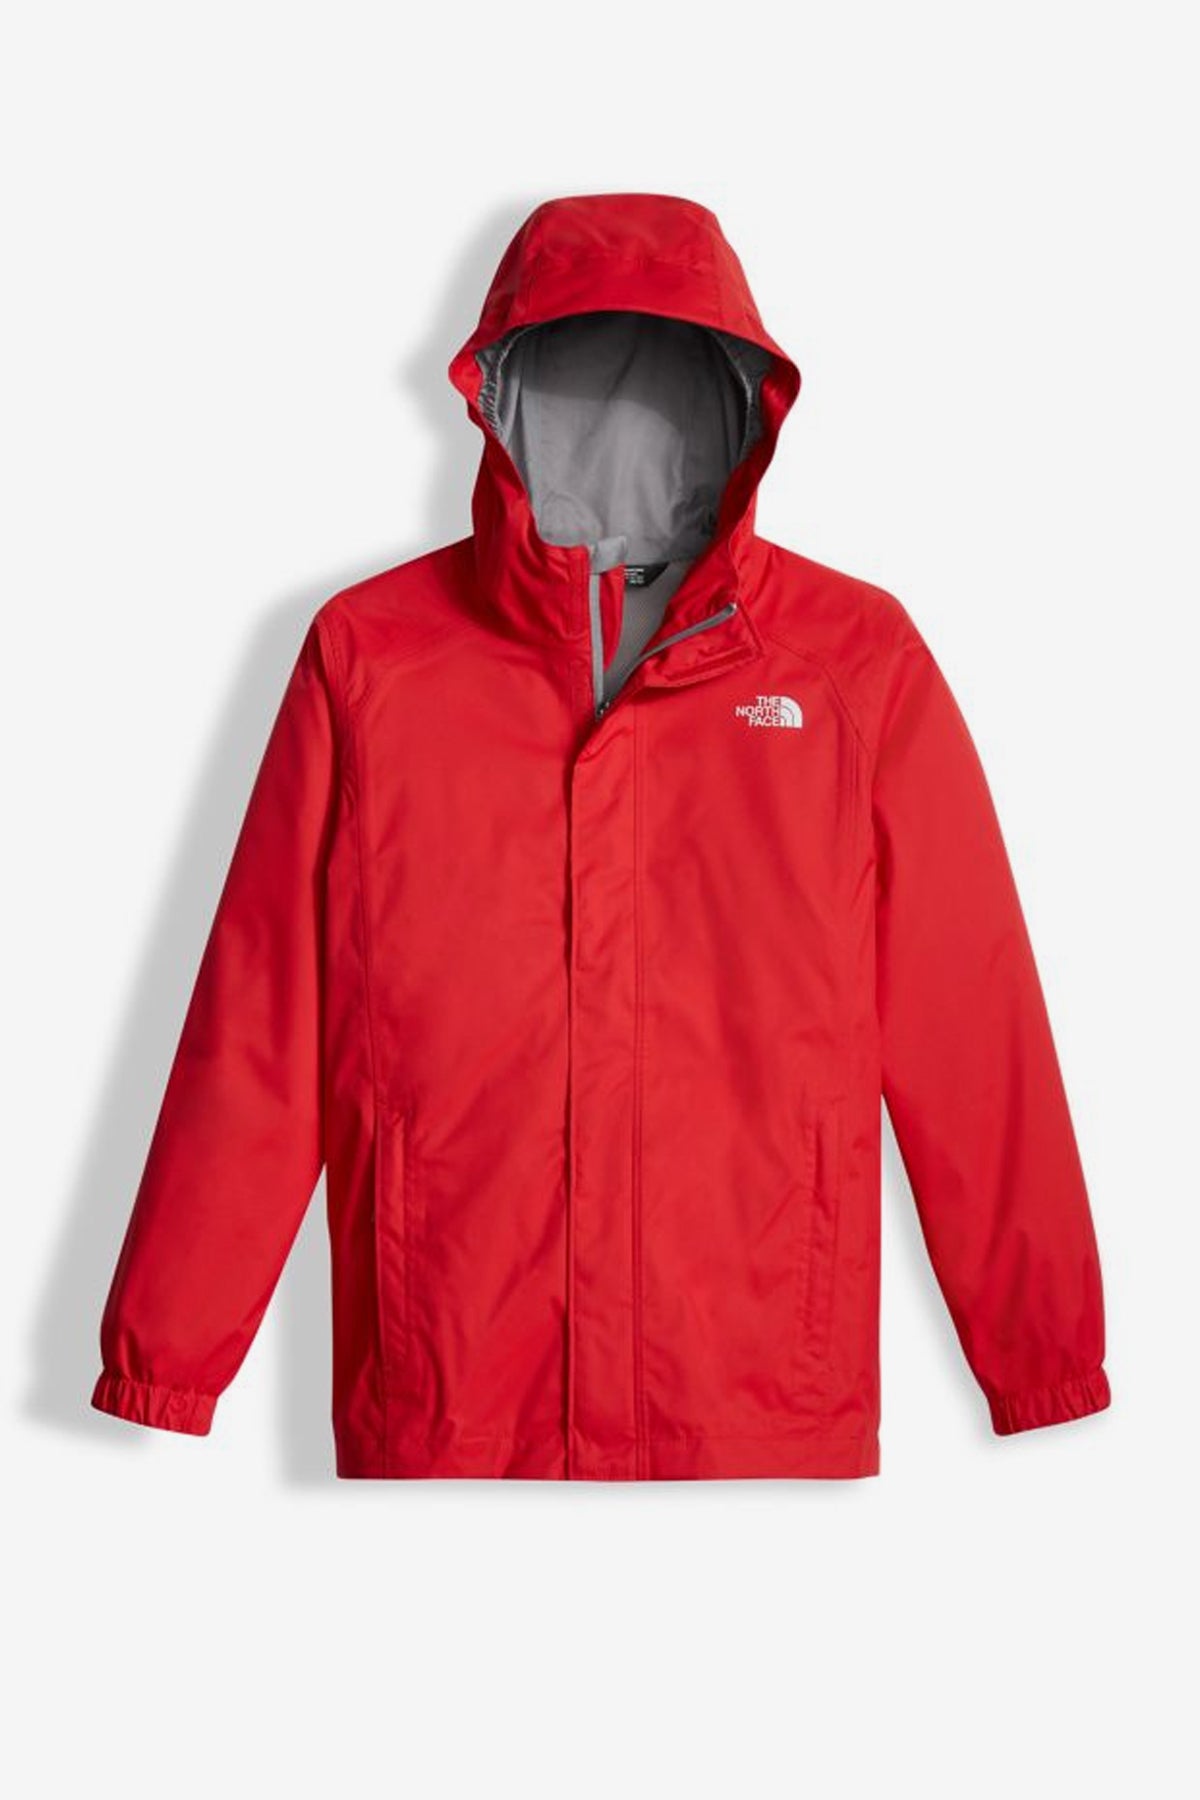 north face red jacket